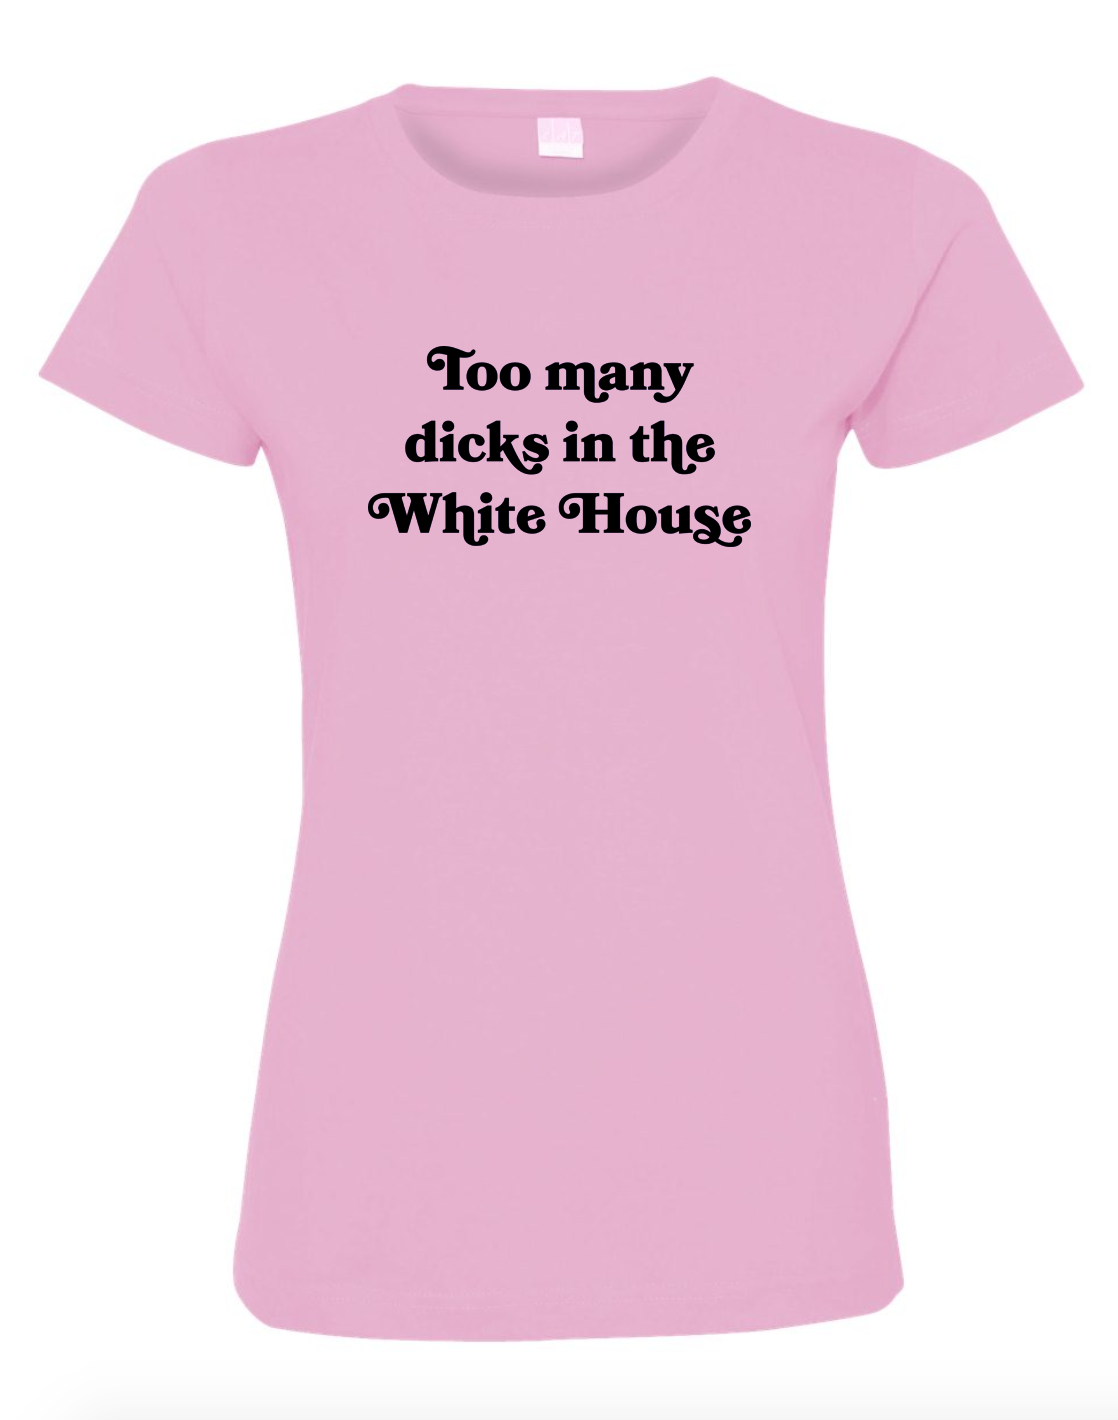 Too Many Dicks In The White House Pink Women's Cut Shirt with Black Lettering #TooManyDicksInTheWhiteHouse